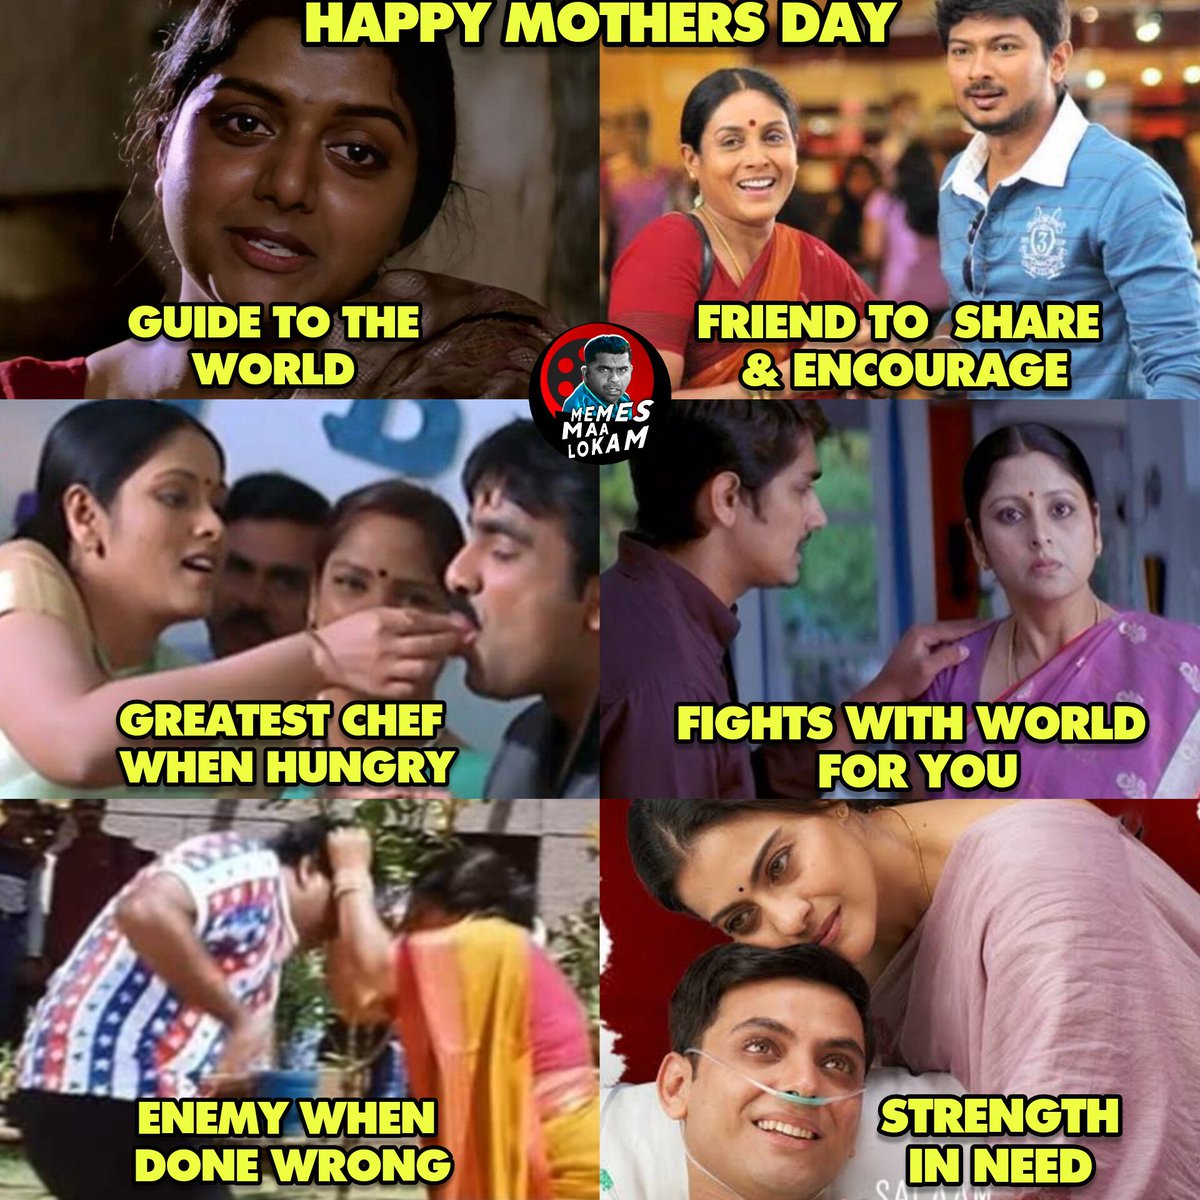 HAPPY MOTHERS DAY 🙏💐 #mother #Amma #Strength #Supportsystem #fighter #Chef #Guide #Friend #God #Allinone #Happymothersday #Nurse #Children #Generations #Force #Love #Bonding #Chatrapathi #Bommarillu Follow @Nb4Ea 👈